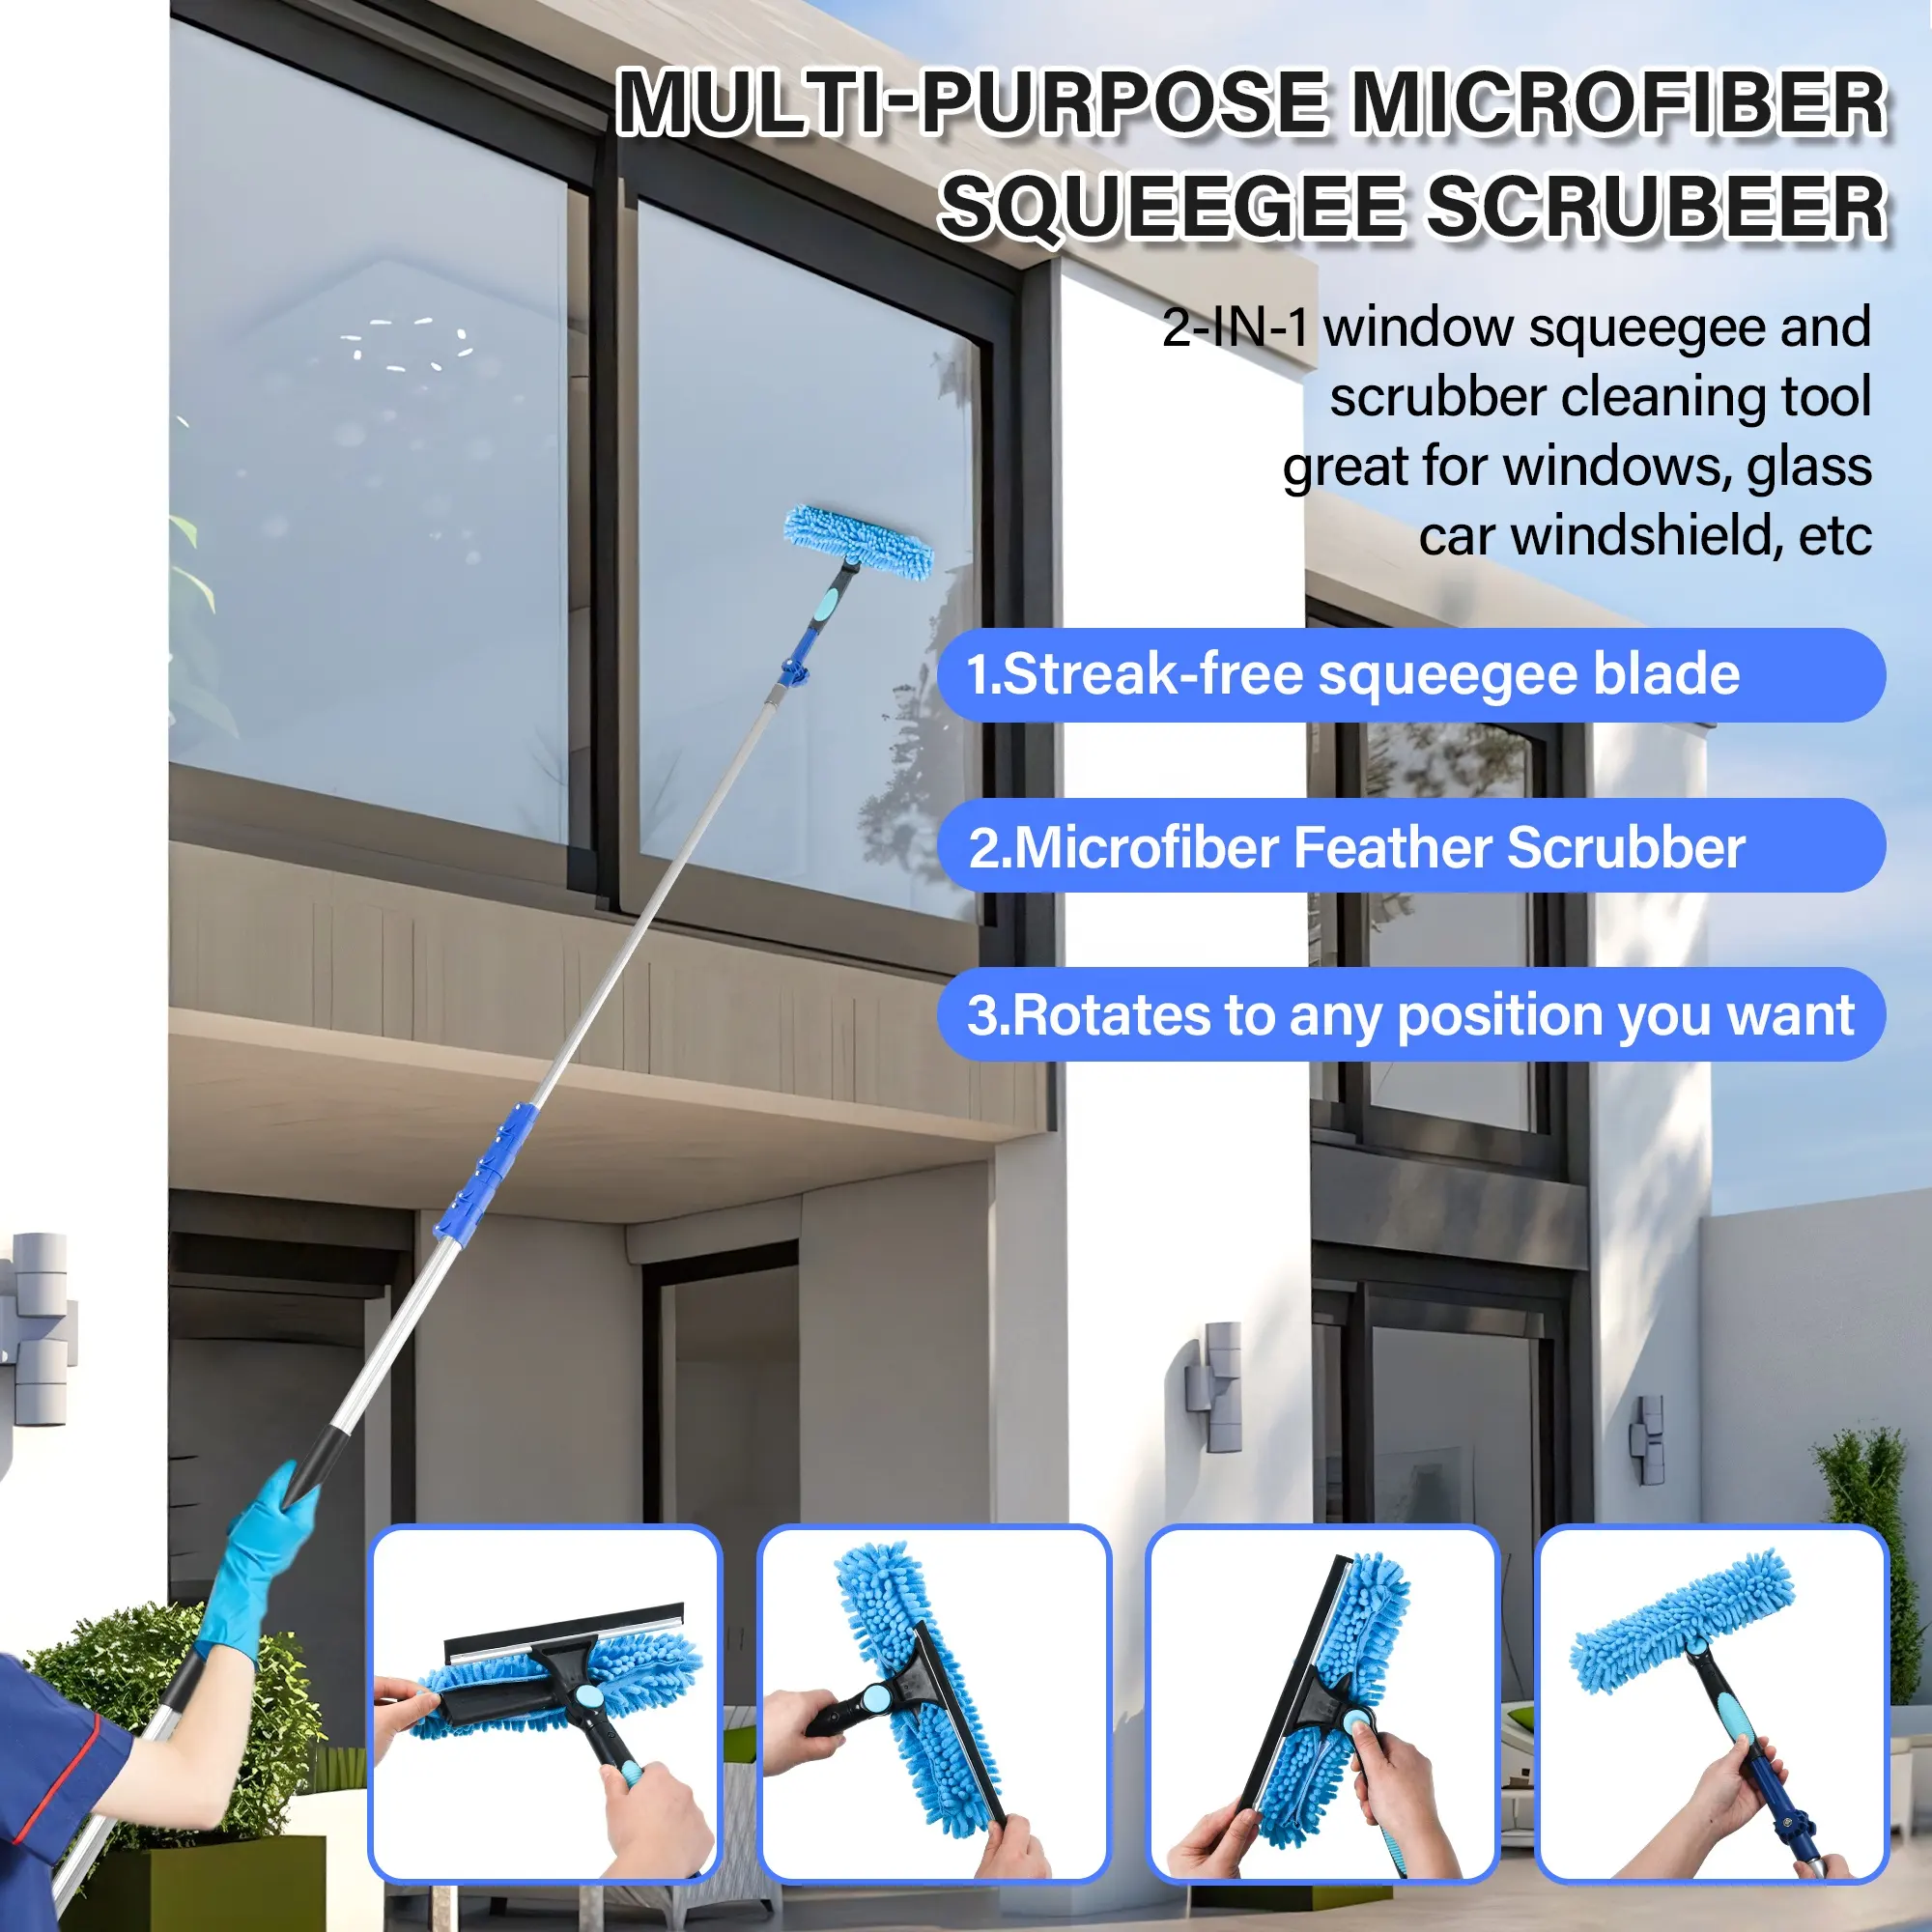 High Reach Household Window Ceiling 5 in 1 12 FT Light Weight Fan Cobweb Telescopic Retractable Aluminum Alloy Cleaning Set